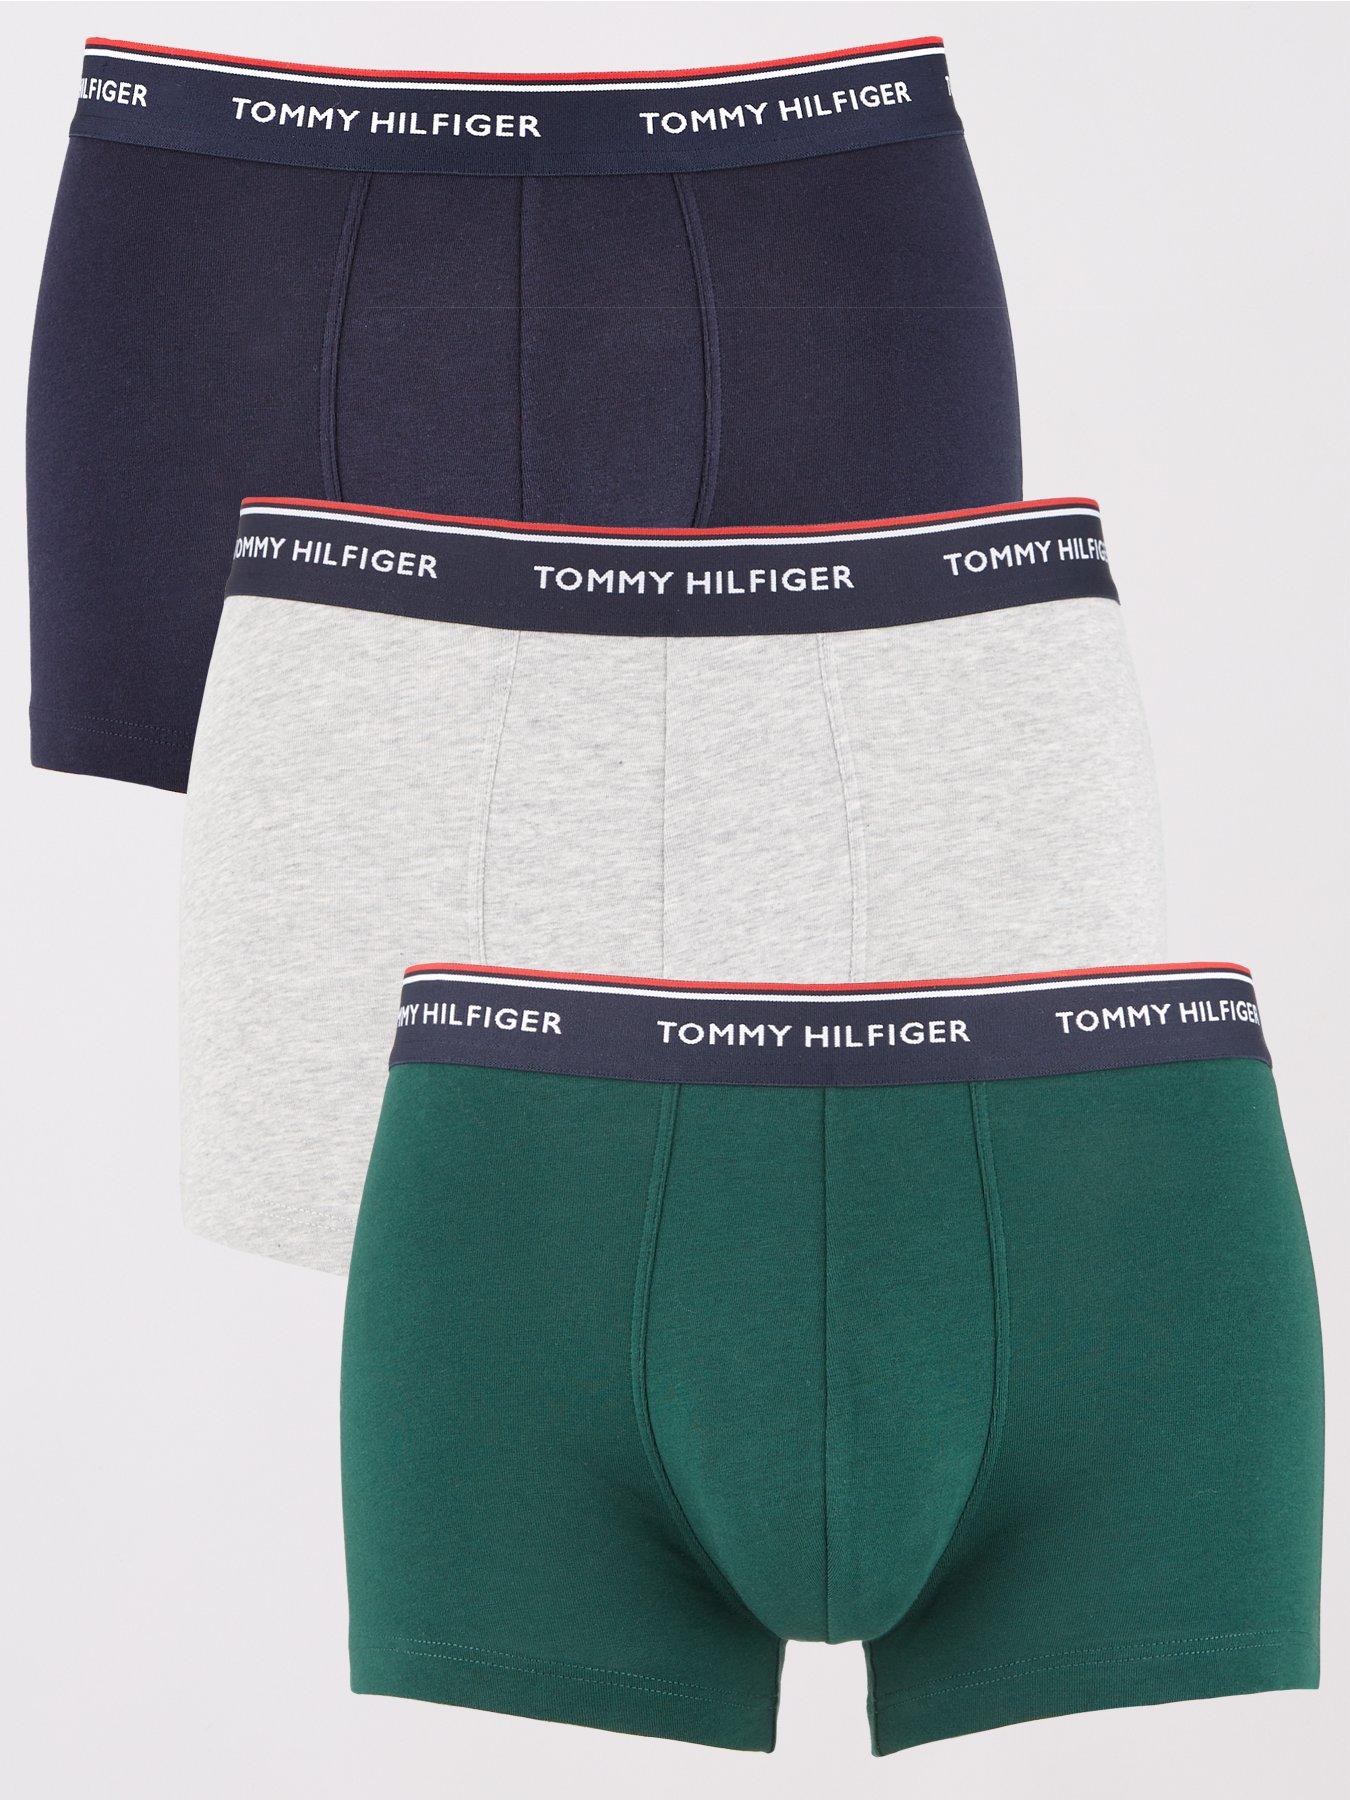 Tommy Hilfiger Men's Cotton Classics 6-Pack Brief, Black, Small at   Men's Clothing store